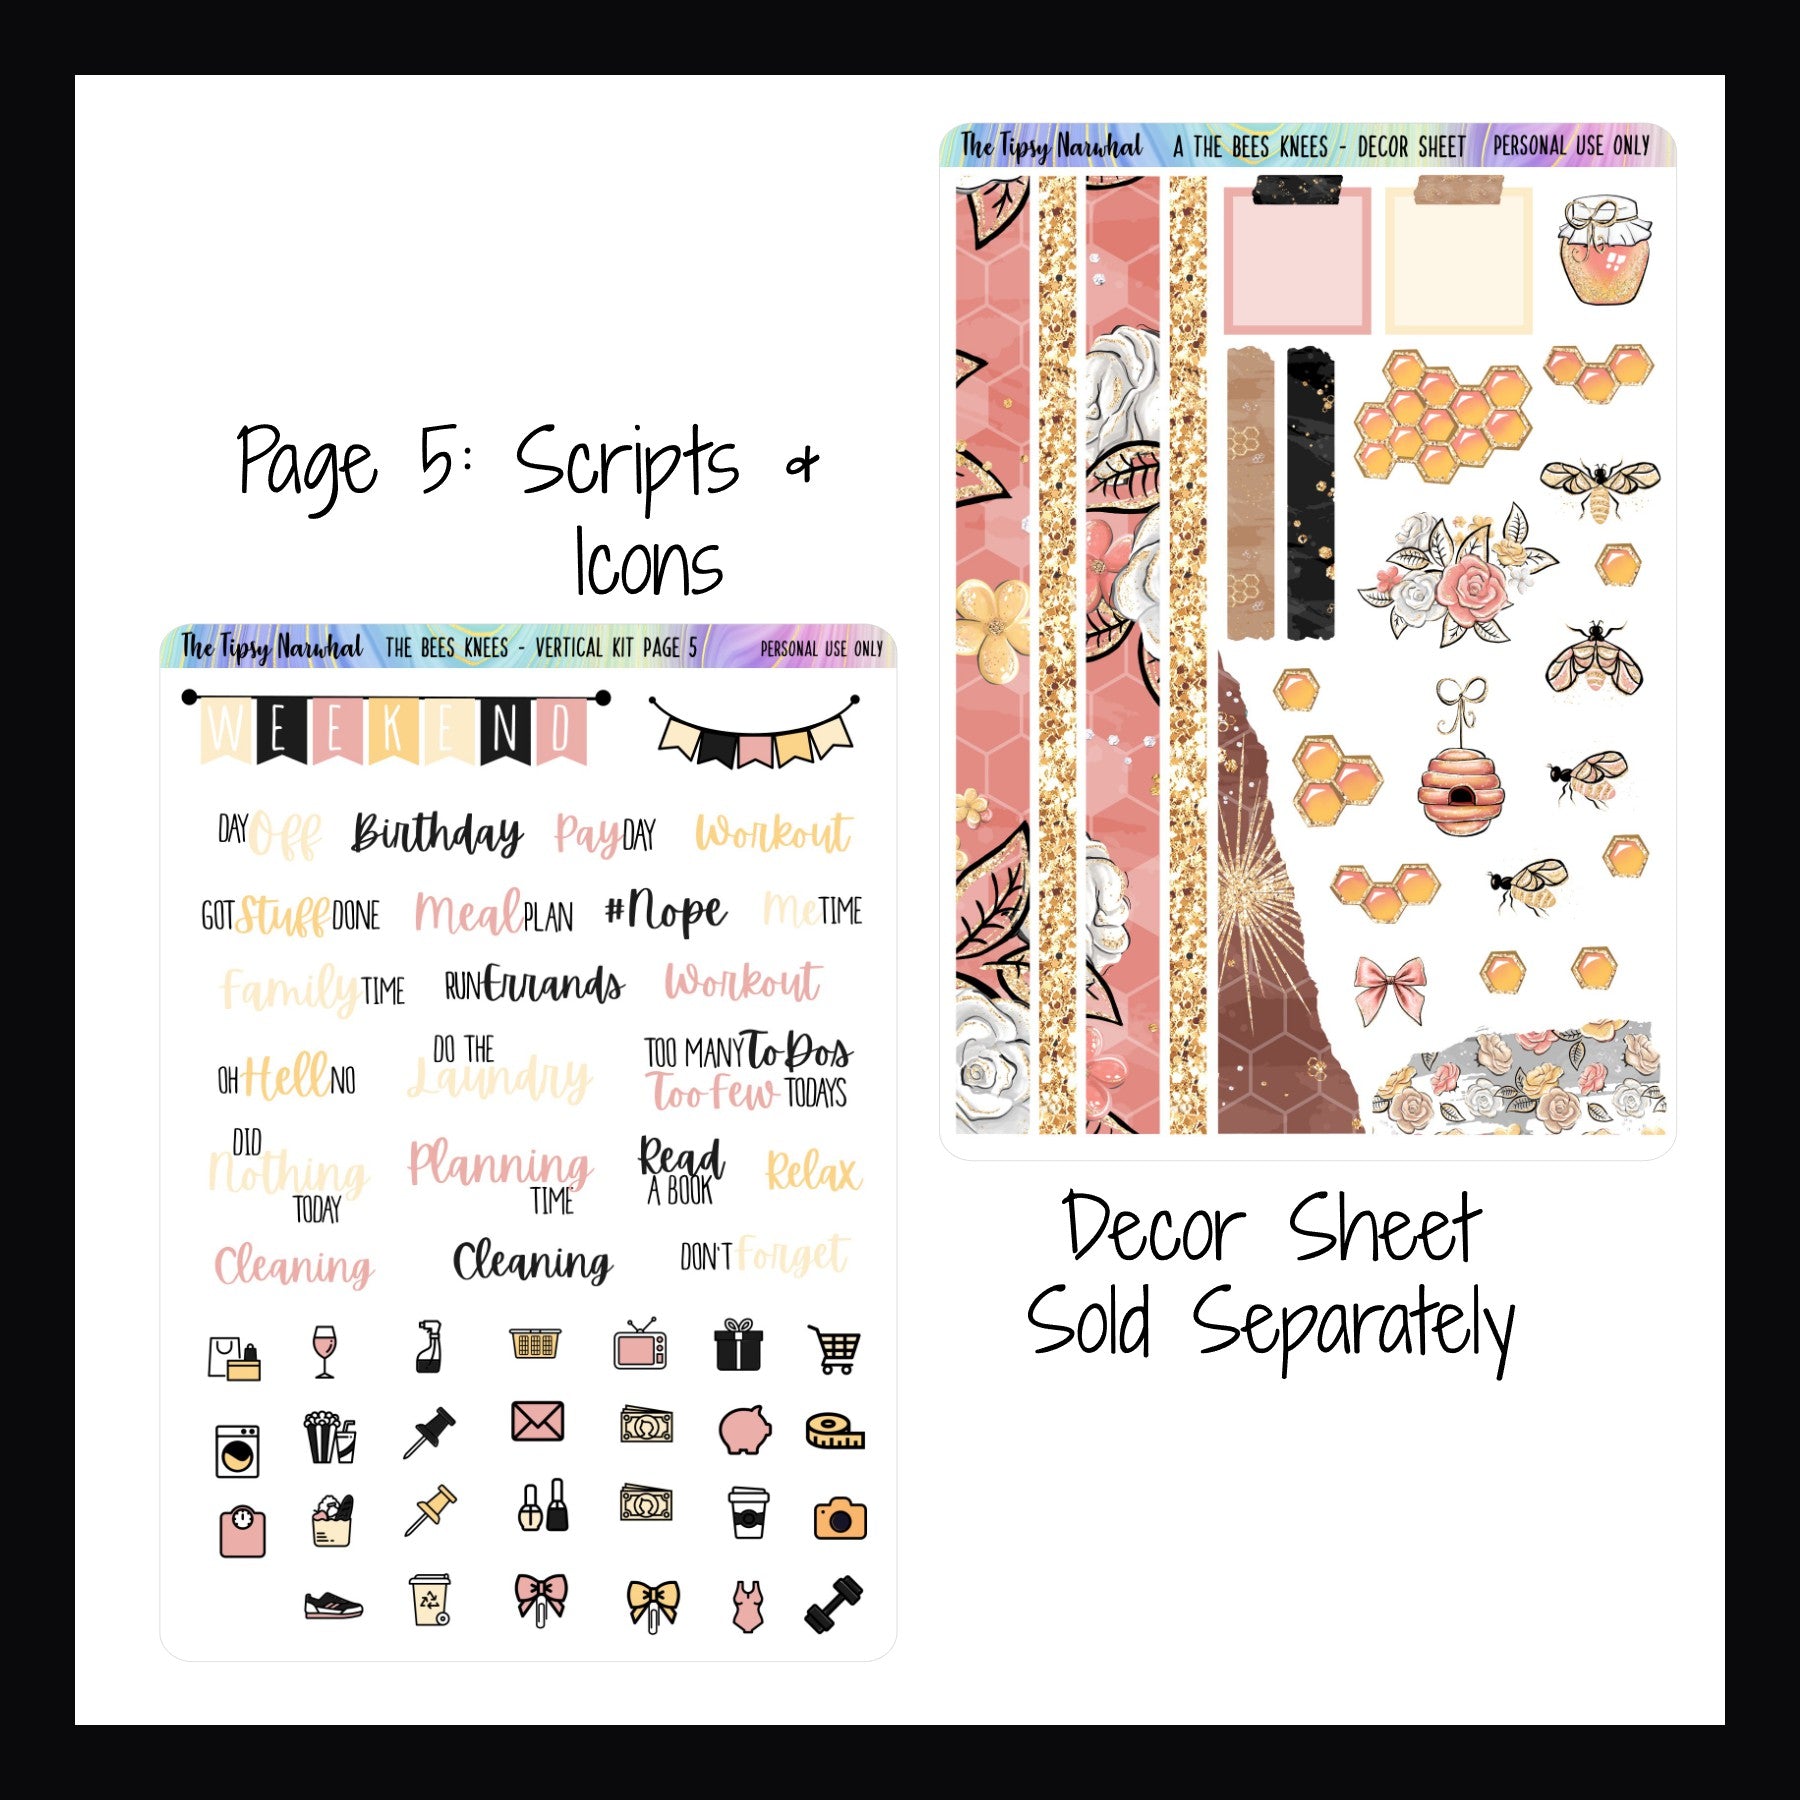 Digital The Bees Knees Vertical Kit page 5 and decor sheet.  Page 5 features script stickers, daily icon stickers and weekend banner.  The decor sheet is available separately.